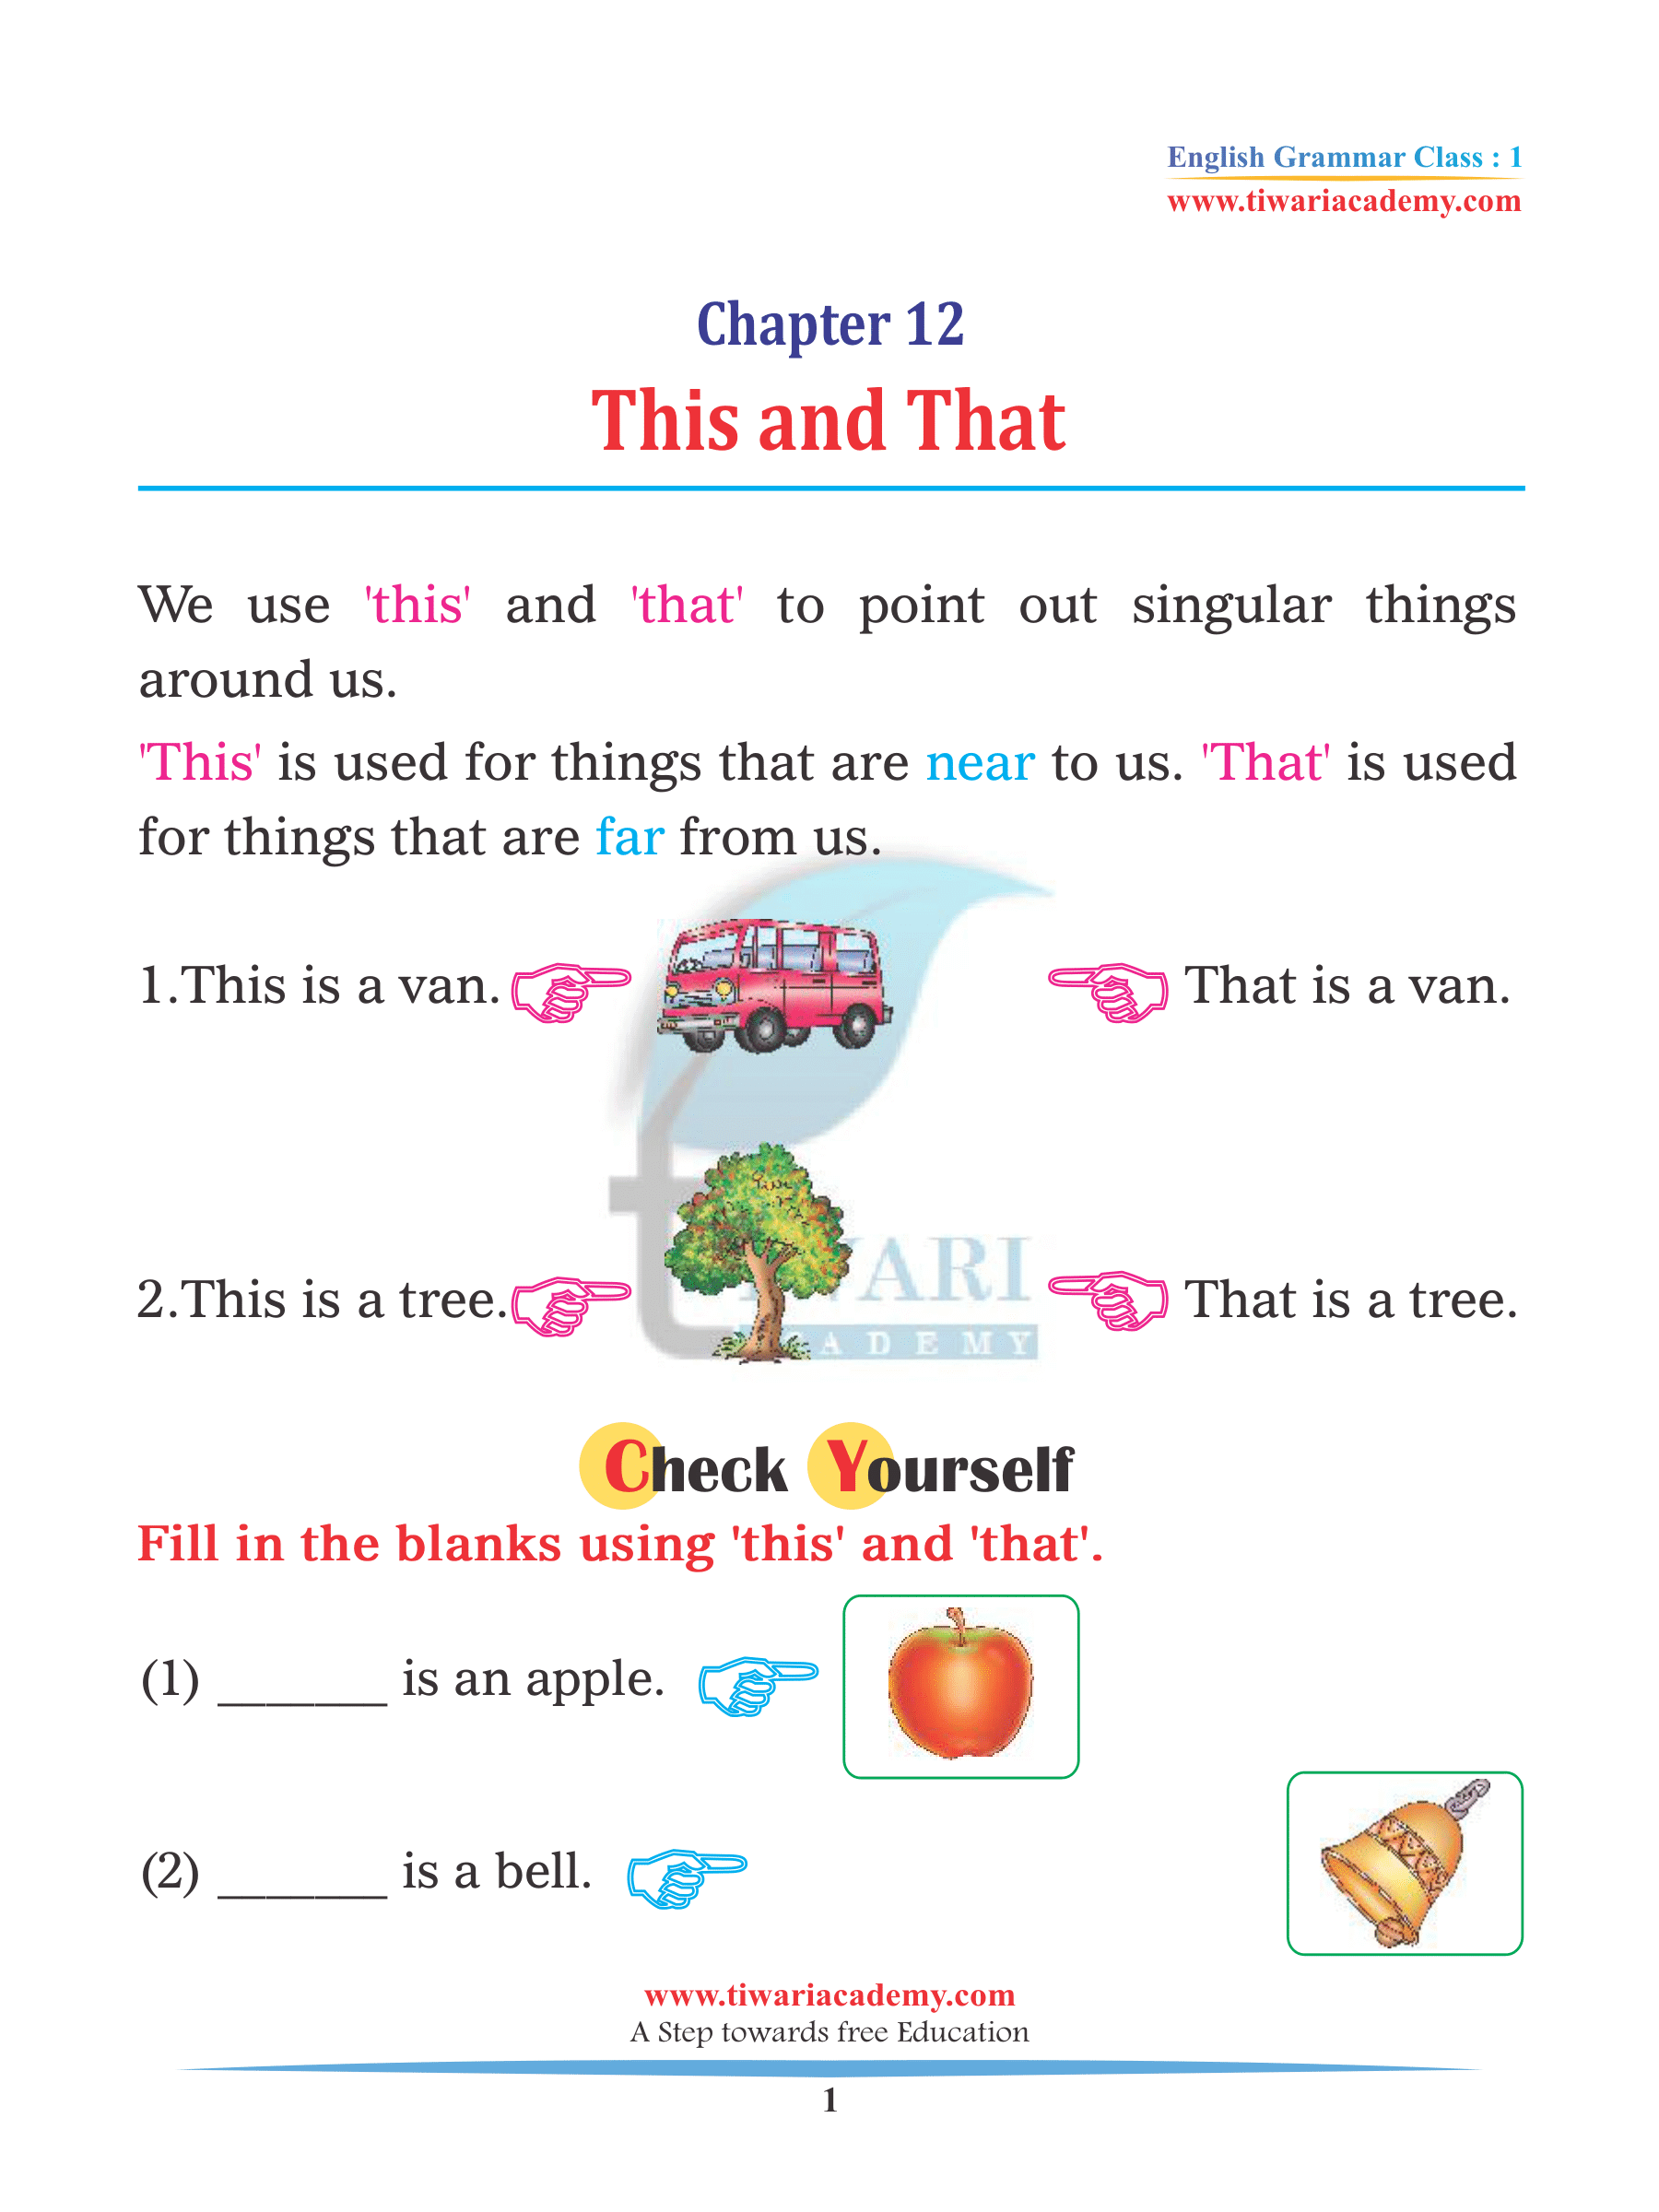 Use of This and That for class 1 Grammar